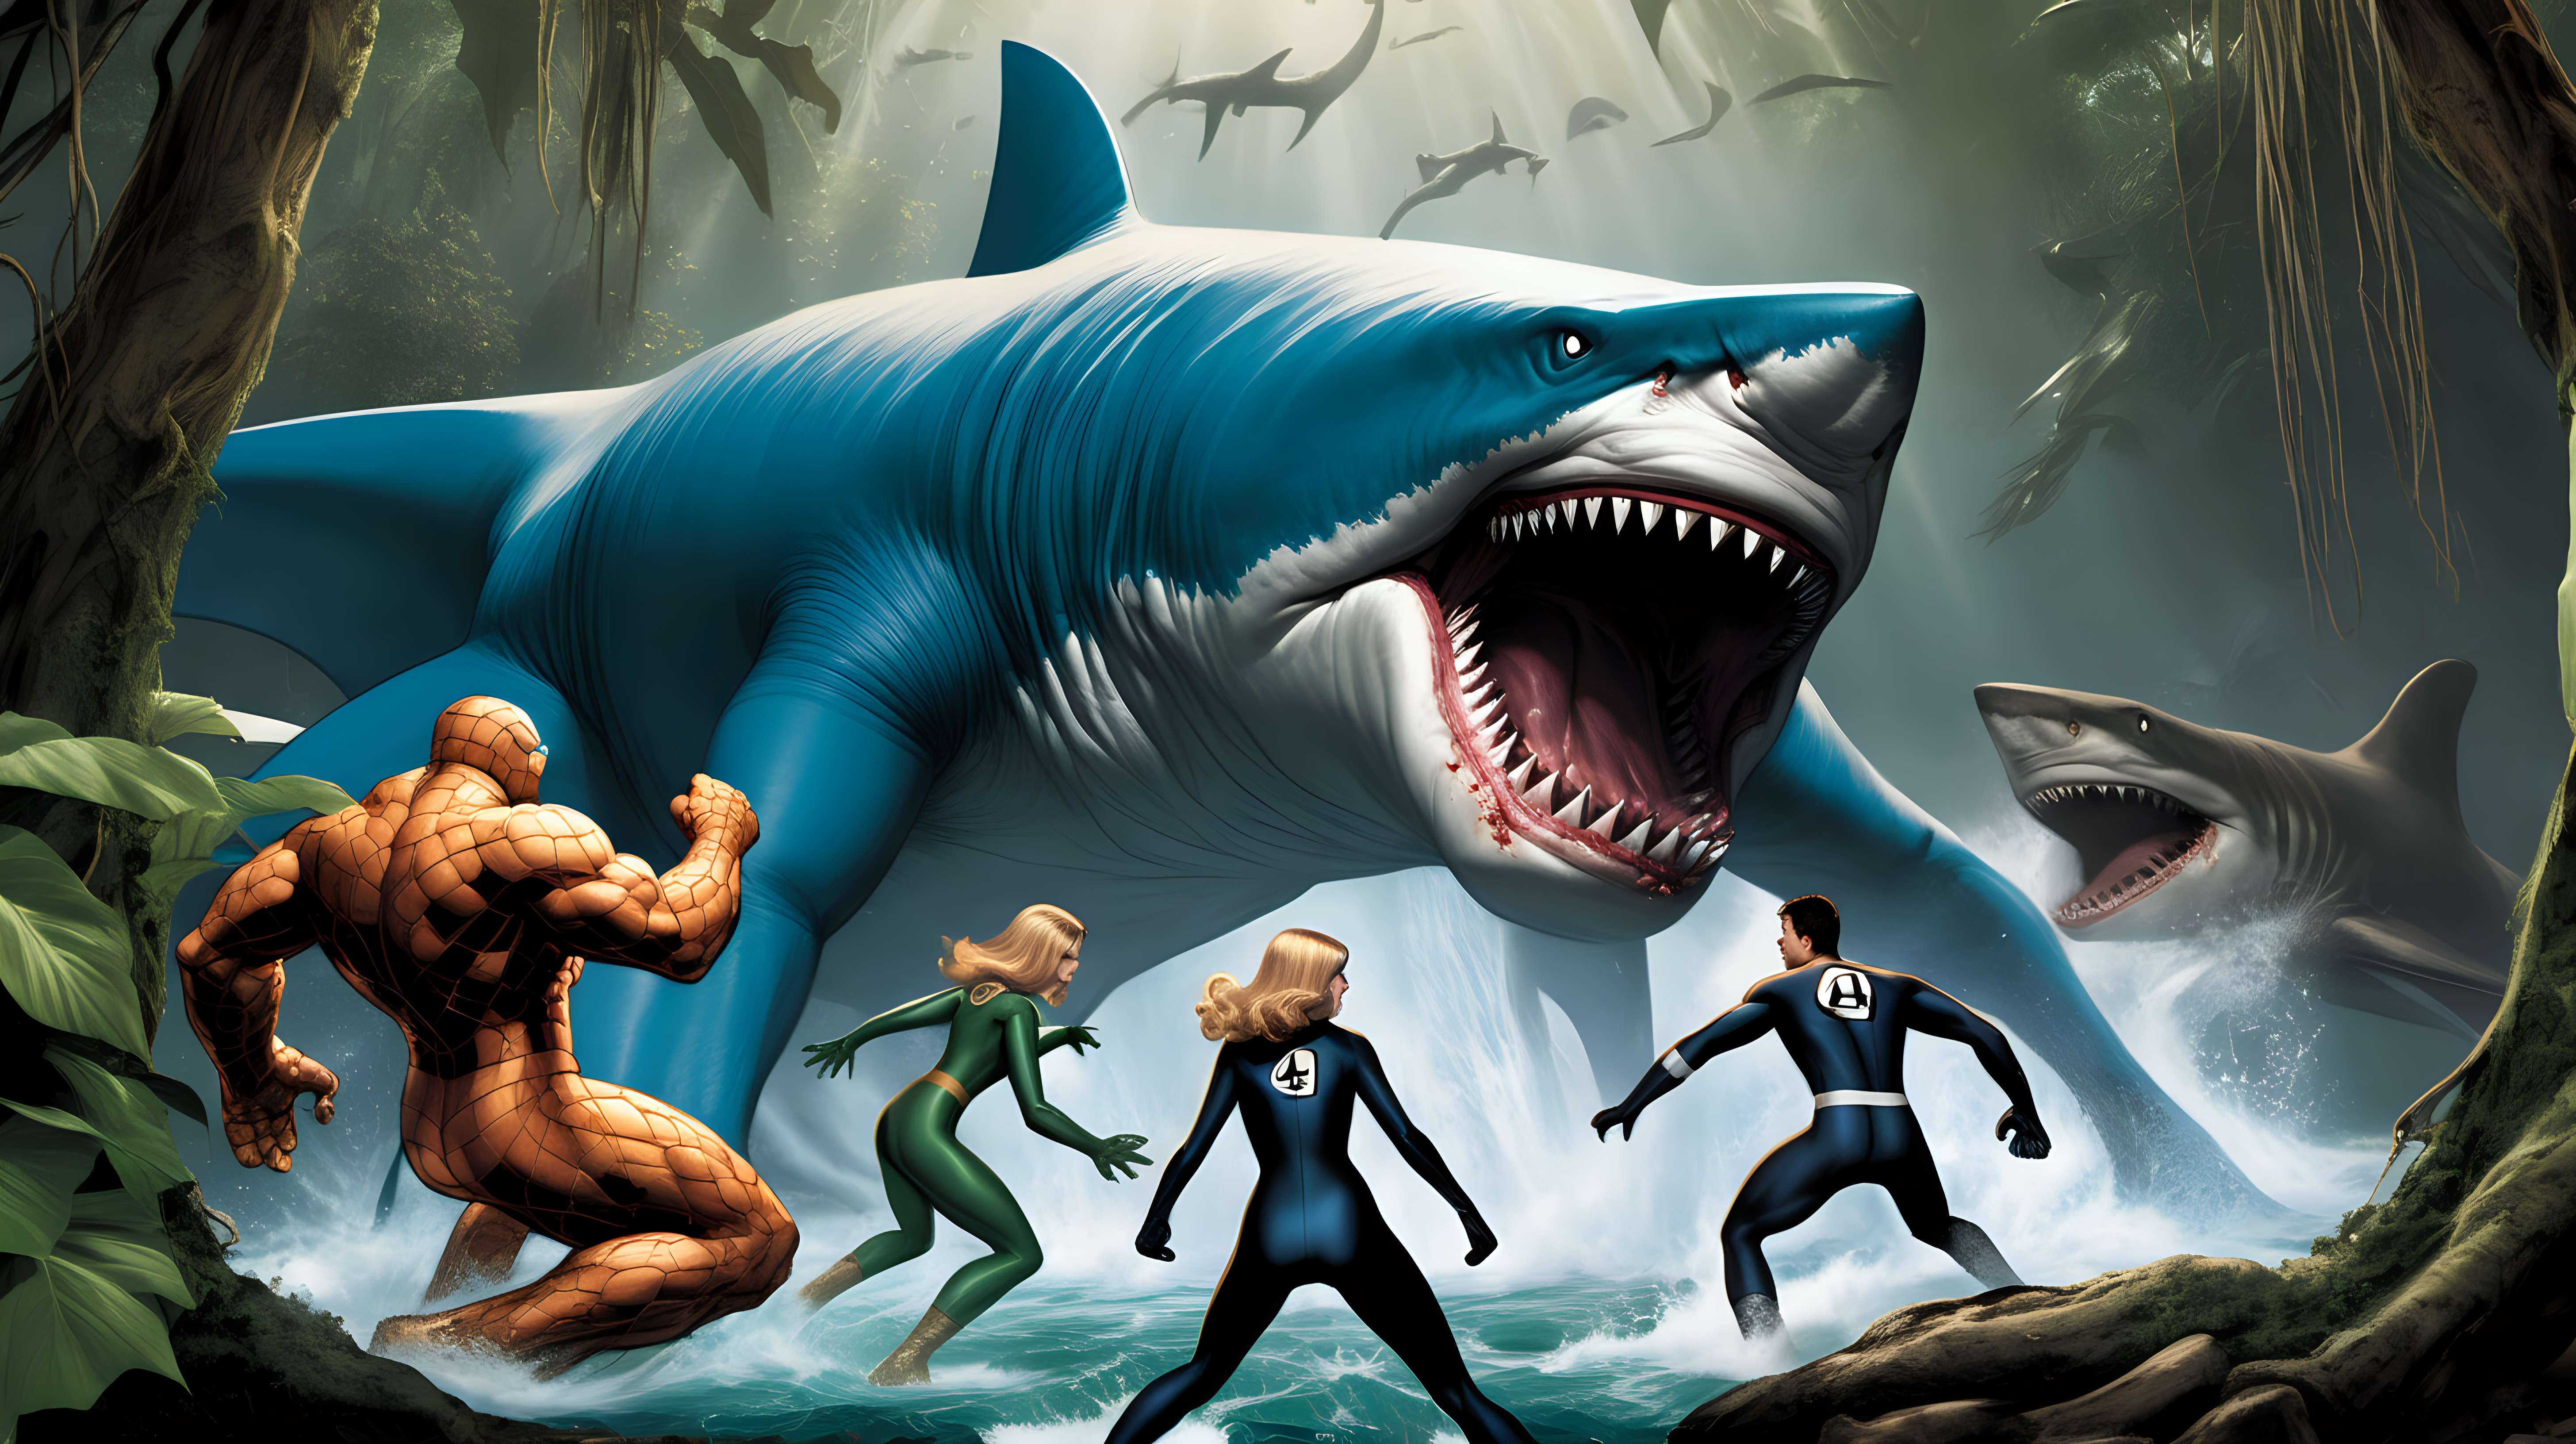 The Fantastic Four fights a giant shark with legs and wings in the jungle